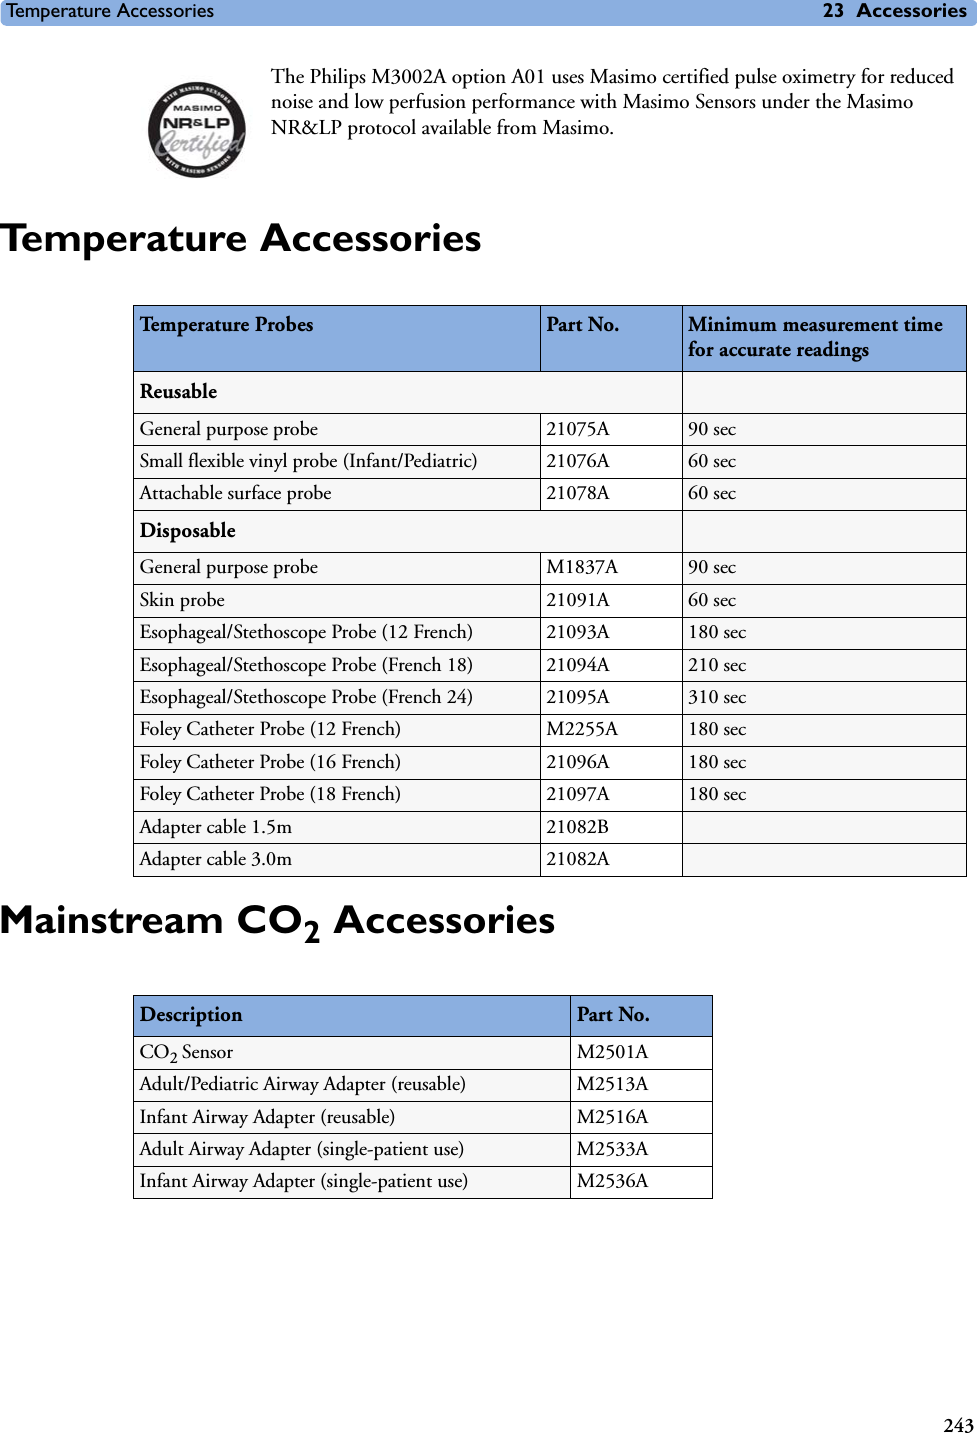 Temperature Accessories 23 Accessories243The Philips M3002A option A01 uses Masimo certified pulse oximetry for reduced noise and low perfusion performance with Masimo Sensors under the Masimo NR&amp;LP protocol available from Masimo.Temperature AccessoriesMainstream CO2 AccessoriesTemperature Probes Part No.  Minimum measurement time for accurate readingsReusableGeneral purpose probe 21075A 90 secSmall flexible vinyl probe (Infant/Pediatric) 21076A 60 secAttachable surface probe 21078A 60 secDisposableGeneral purpose probe M1837A 90 secSkin probe 21091A 60 secEsophageal/Stethoscope Probe (12 French) 21093A 180 secEsophageal/Stethoscope Probe (French 18)  21094A 210 secEsophageal/Stethoscope Probe (French 24) 21095A 310 secFoley Catheter Probe (12 French) M2255A 180 secFoley Catheter Probe (16 French) 21096A 180 secFoley Catheter Probe (18 French) 21097A 180 secAdapter cable 1.5m 21082BAdapter cable 3.0m 21082ADescription Part No. CO2 Sensor M2501AAdult/Pediatric Airway Adapter (reusable) M2513AInfant Airway Adapter (reusable) M2516AAdult Airway Adapter (single-patient use) M2533AInfant Airway Adapter (single-patient use) M2536A